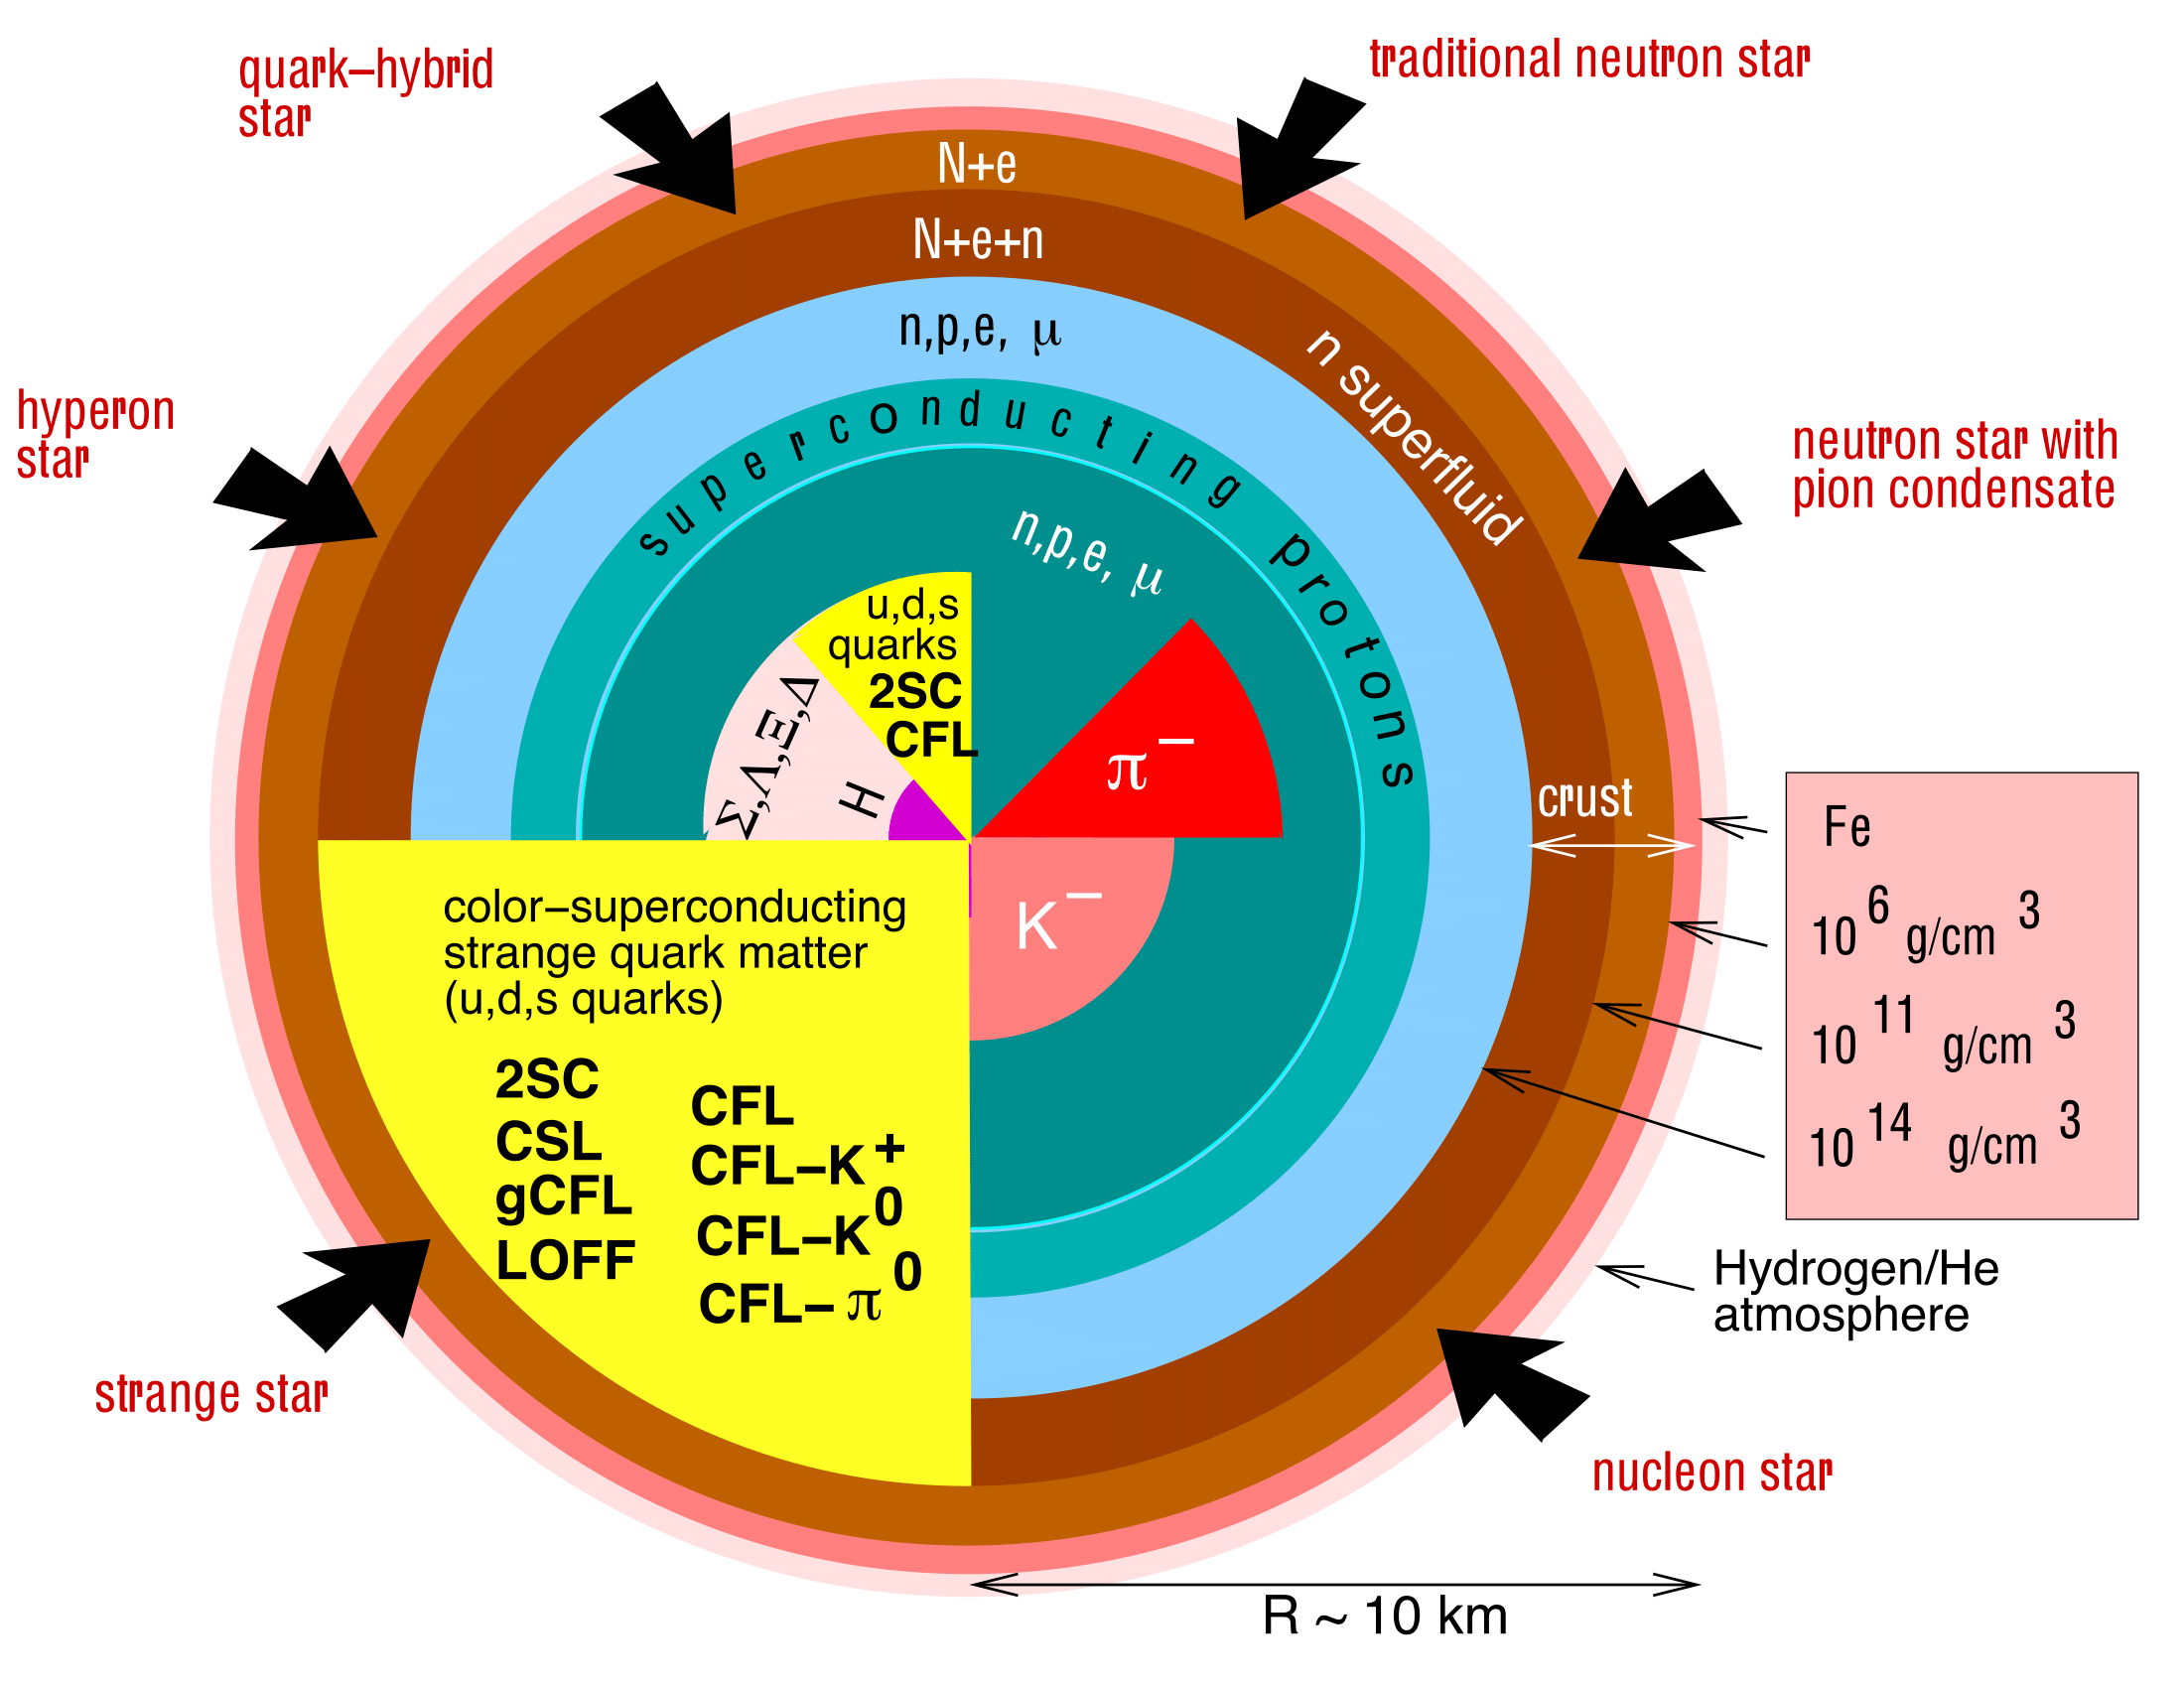 The picture illustrates some of the possible forms of matter existing inside of neutron stars. It has been created by the physicist Fridolin Weber (http://www.physics.sdsu.edu/fweber/) an expert on the equation of state of dense stellar matter. Image Credit: Progress in Nuclear and Particle Physics